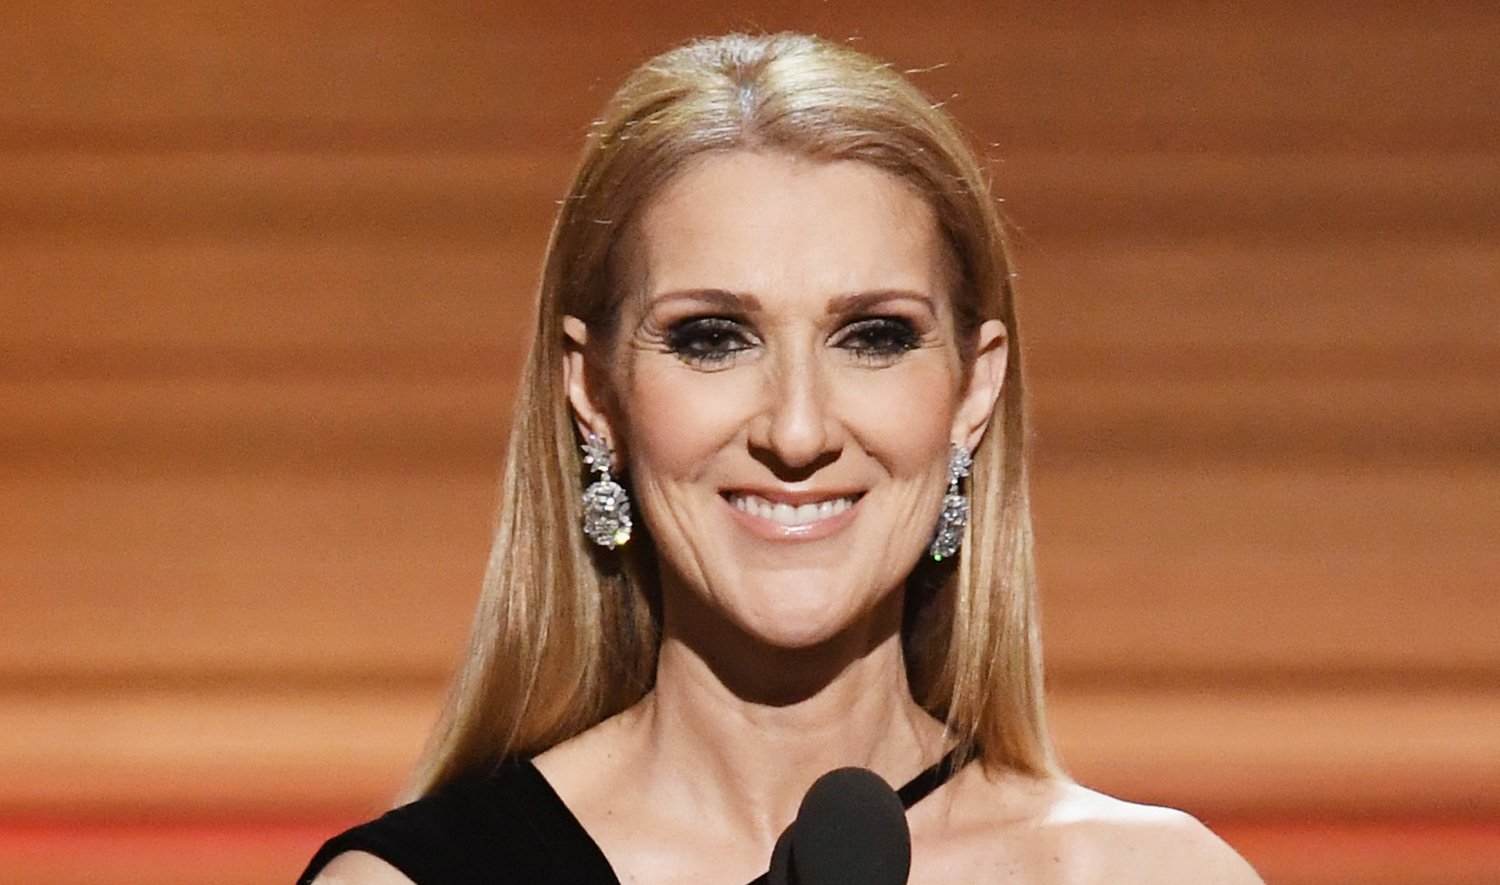 Celine Dion has a strong message for all her online critics